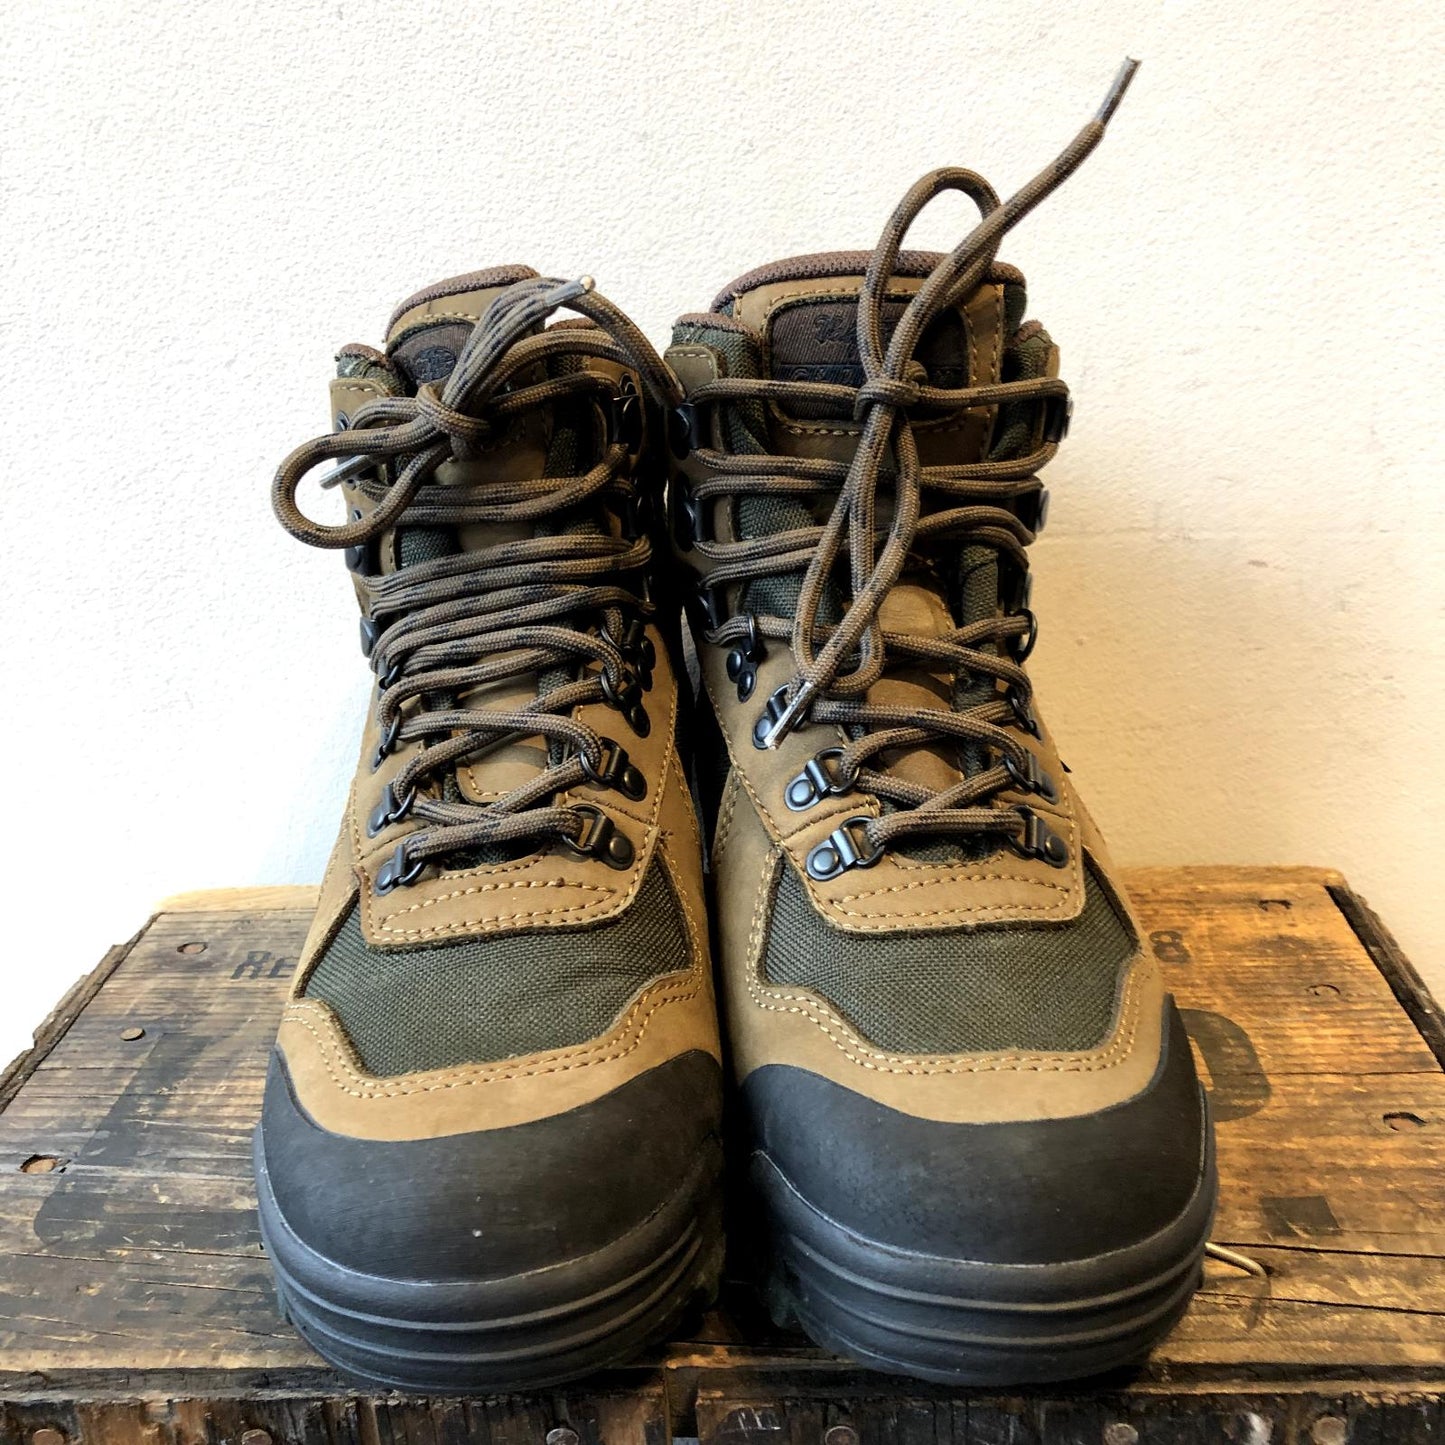 7.5 - Vasque Clarion $165 GORE-TEX Waterproof Hiking Boots NEW w/ Box 0801TH